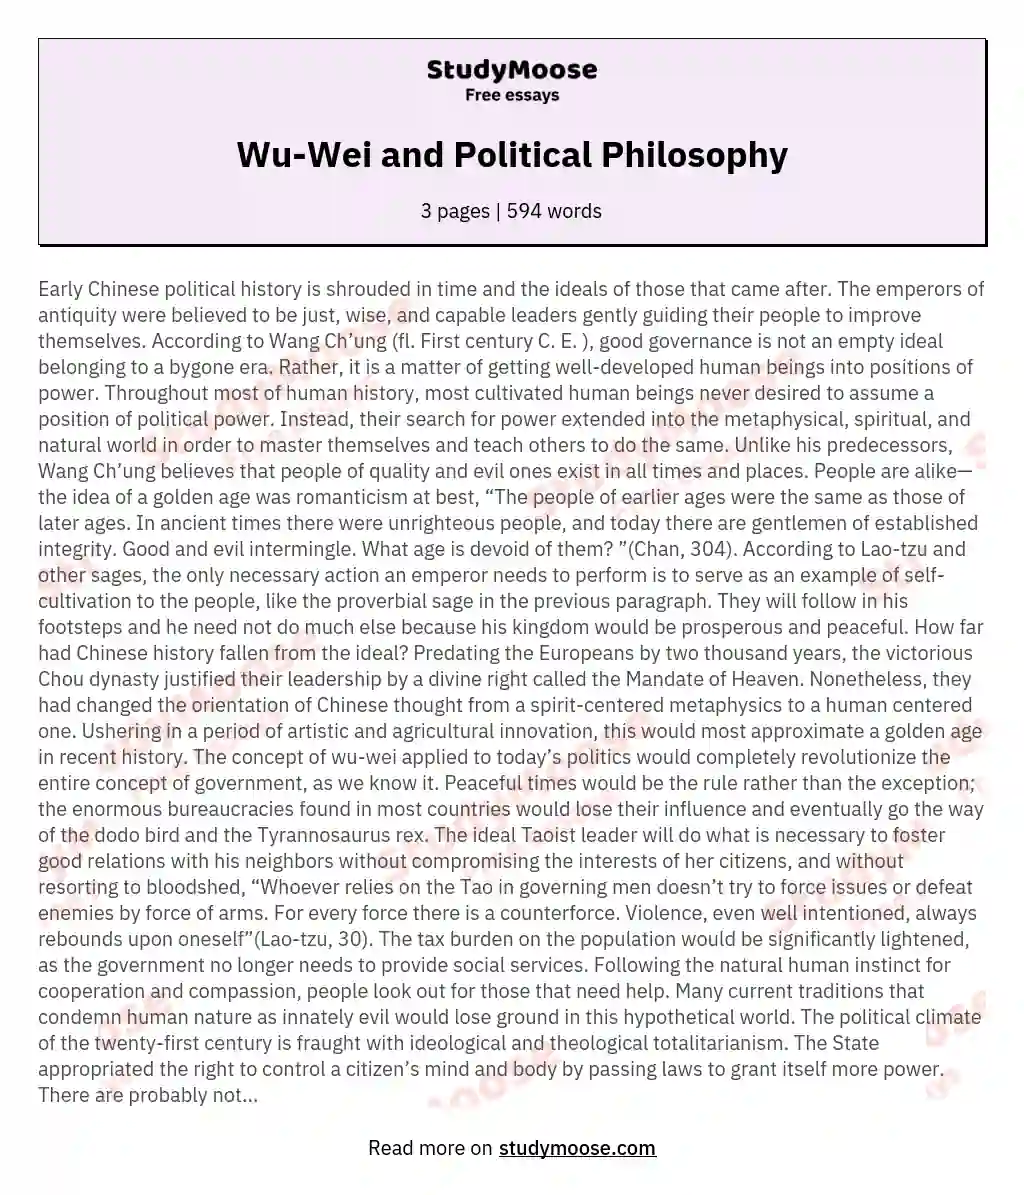 Wu-Wei and Political Philosophy essay